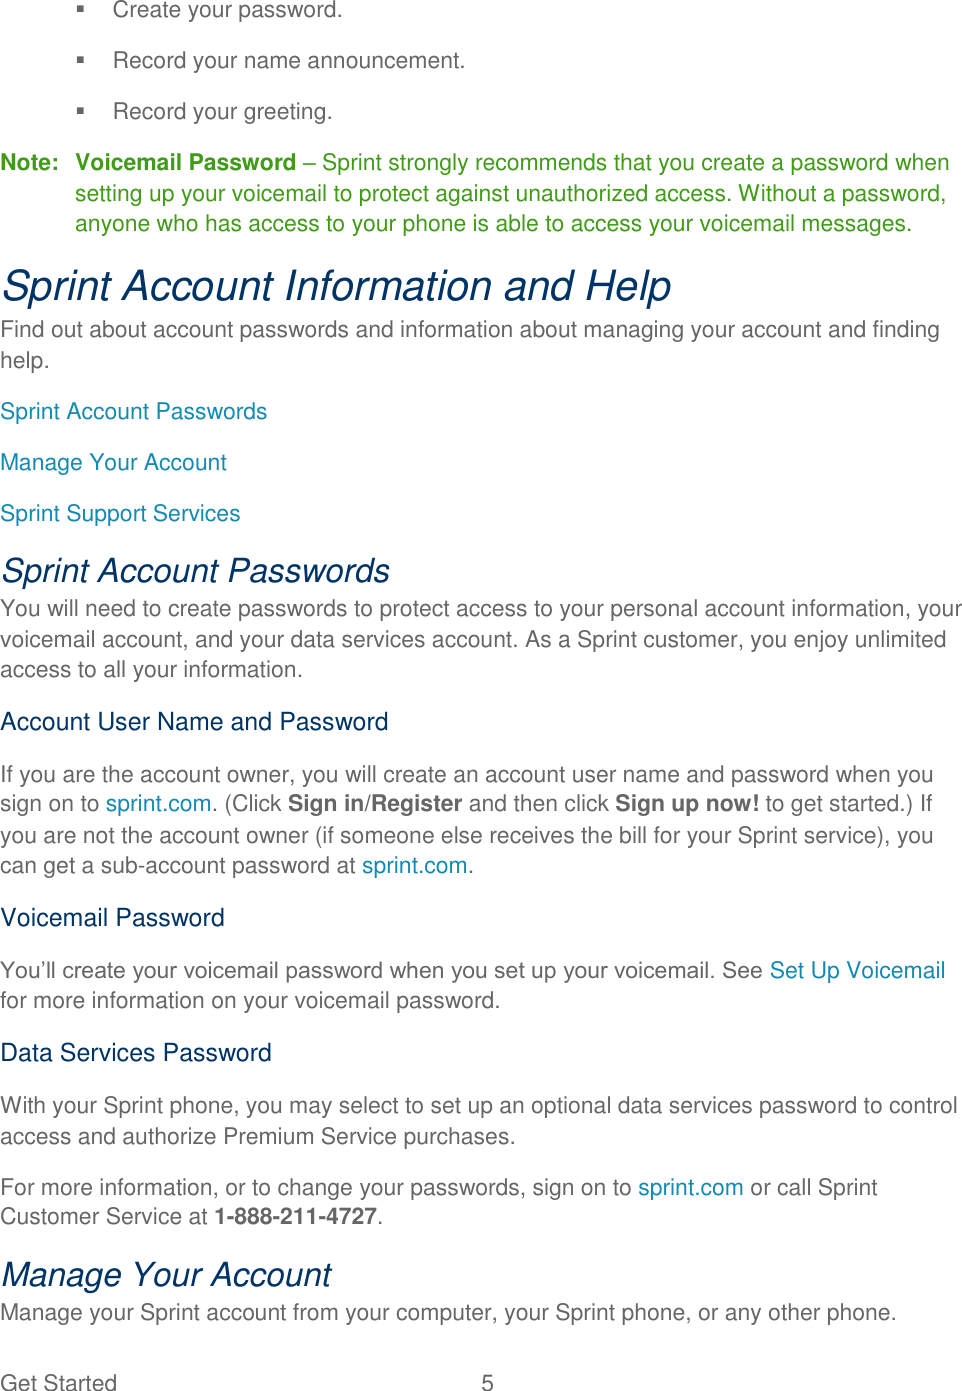 Get Started  5     Create your password.   Record your name announcement.   Record your greeting. Note:  Voicemail Password – Sprint strongly recommends that you create a password when setting up your voicemail to protect against unauthorized access. Without a password, anyone who has access to your phone is able to access your voicemail messages. Sprint Account Information and Help Find out about account passwords and information about managing your account and finding help. Sprint Account Passwords Manage Your Account Sprint Support Services Sprint Account Passwords You will need to create passwords to protect access to your personal account information, your voicemail account, and your data services account. As a Sprint customer, you enjoy unlimited access to all your information. Account User Name and Password If you are the account owner, you will create an account user name and password when you sign on to sprint.com. (Click Sign in/Register and then click Sign up now! to get started.) If you are not the account owner (if someone else receives the bill for your Sprint service), you can get a sub-account password at sprint.com. Voicemail Password You‟ll create your voicemail password when you set up your voicemail. See Set Up Voicemail for more information on your voicemail password. Data Services Password With your Sprint phone, you may select to set up an optional data services password to control access and authorize Premium Service purchases. For more information, or to change your passwords, sign on to sprint.com or call Sprint Customer Service at 1-888-211-4727. Manage Your Account Manage your Sprint account from your computer, your Sprint phone, or any other phone. 